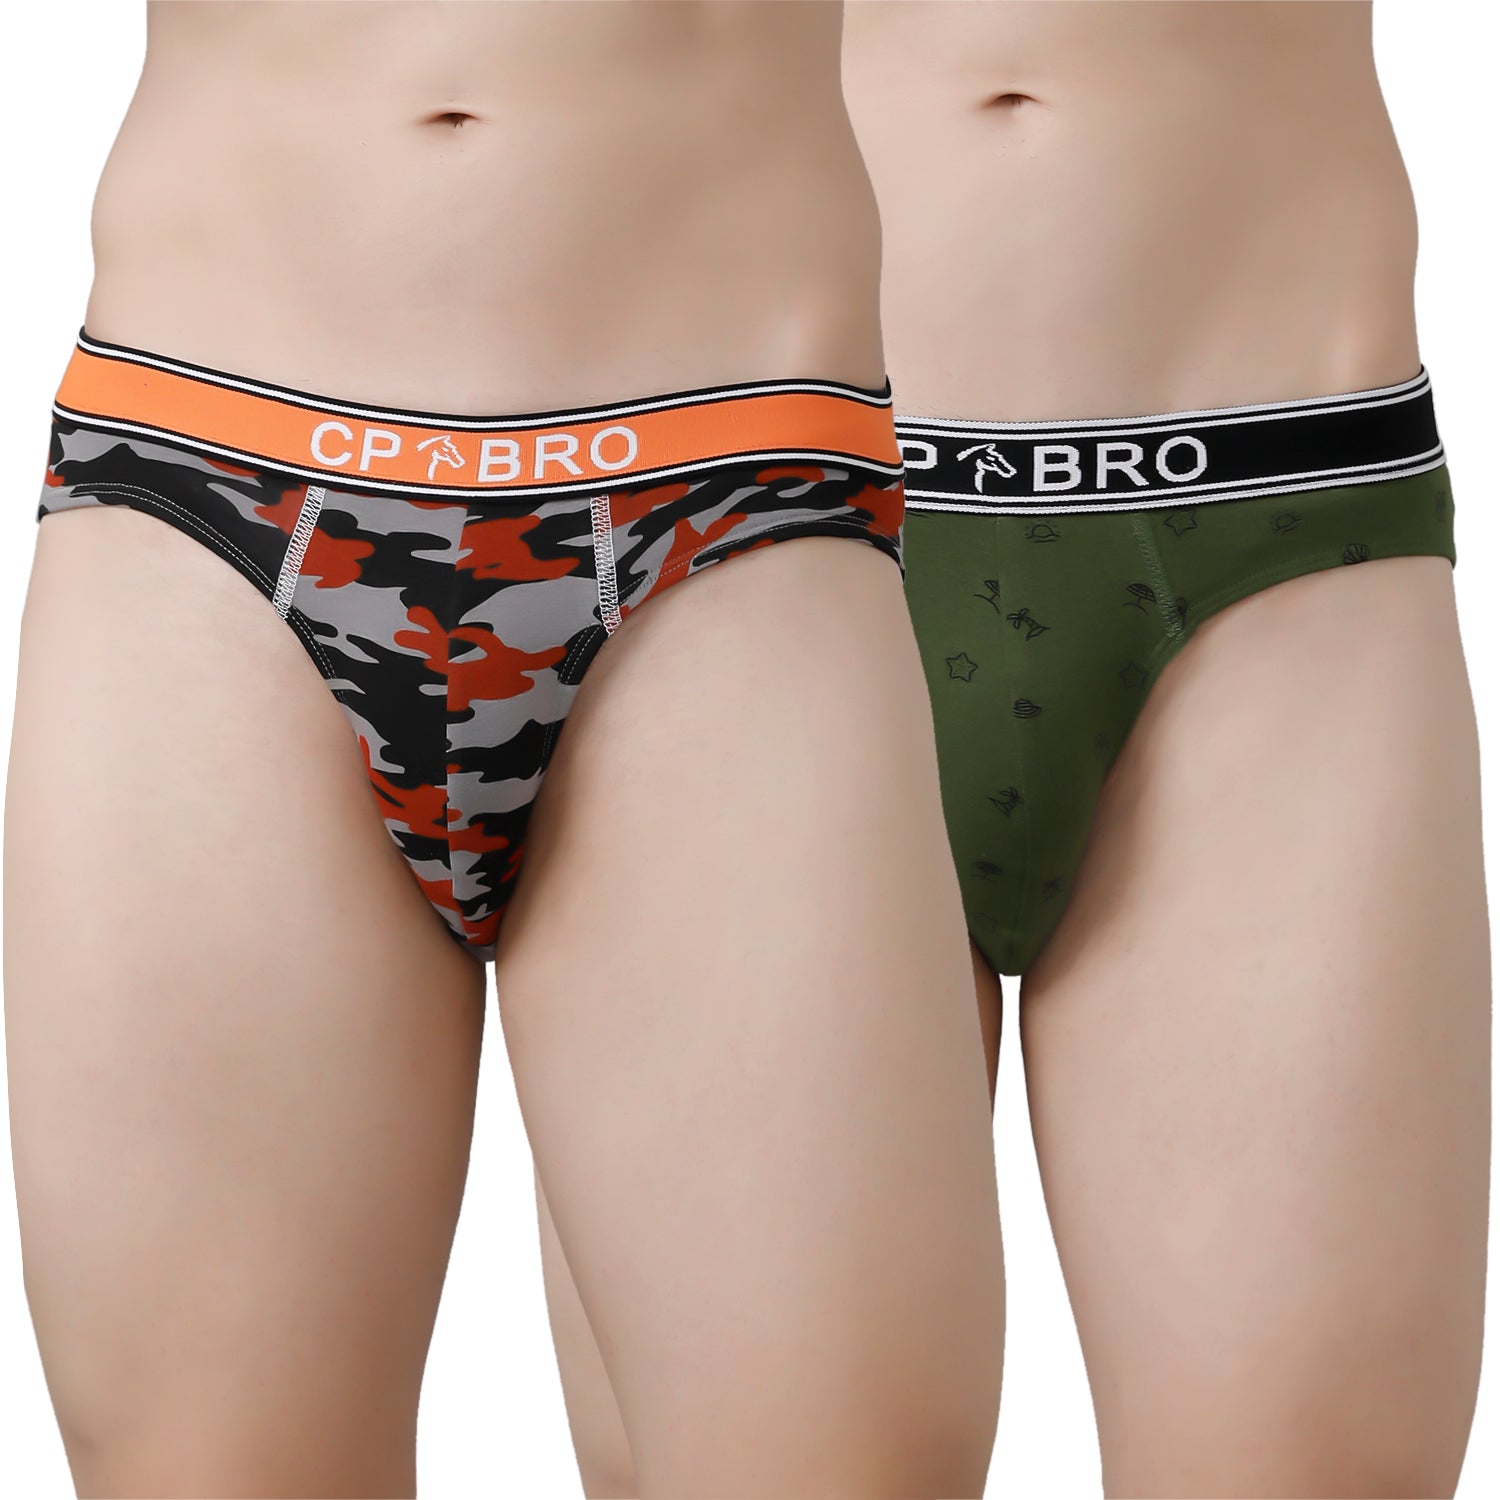 CP BRO Men's Printed Briefs with Exposed Waistband Value Pack - Orange & Olive Green (Pack of 2)